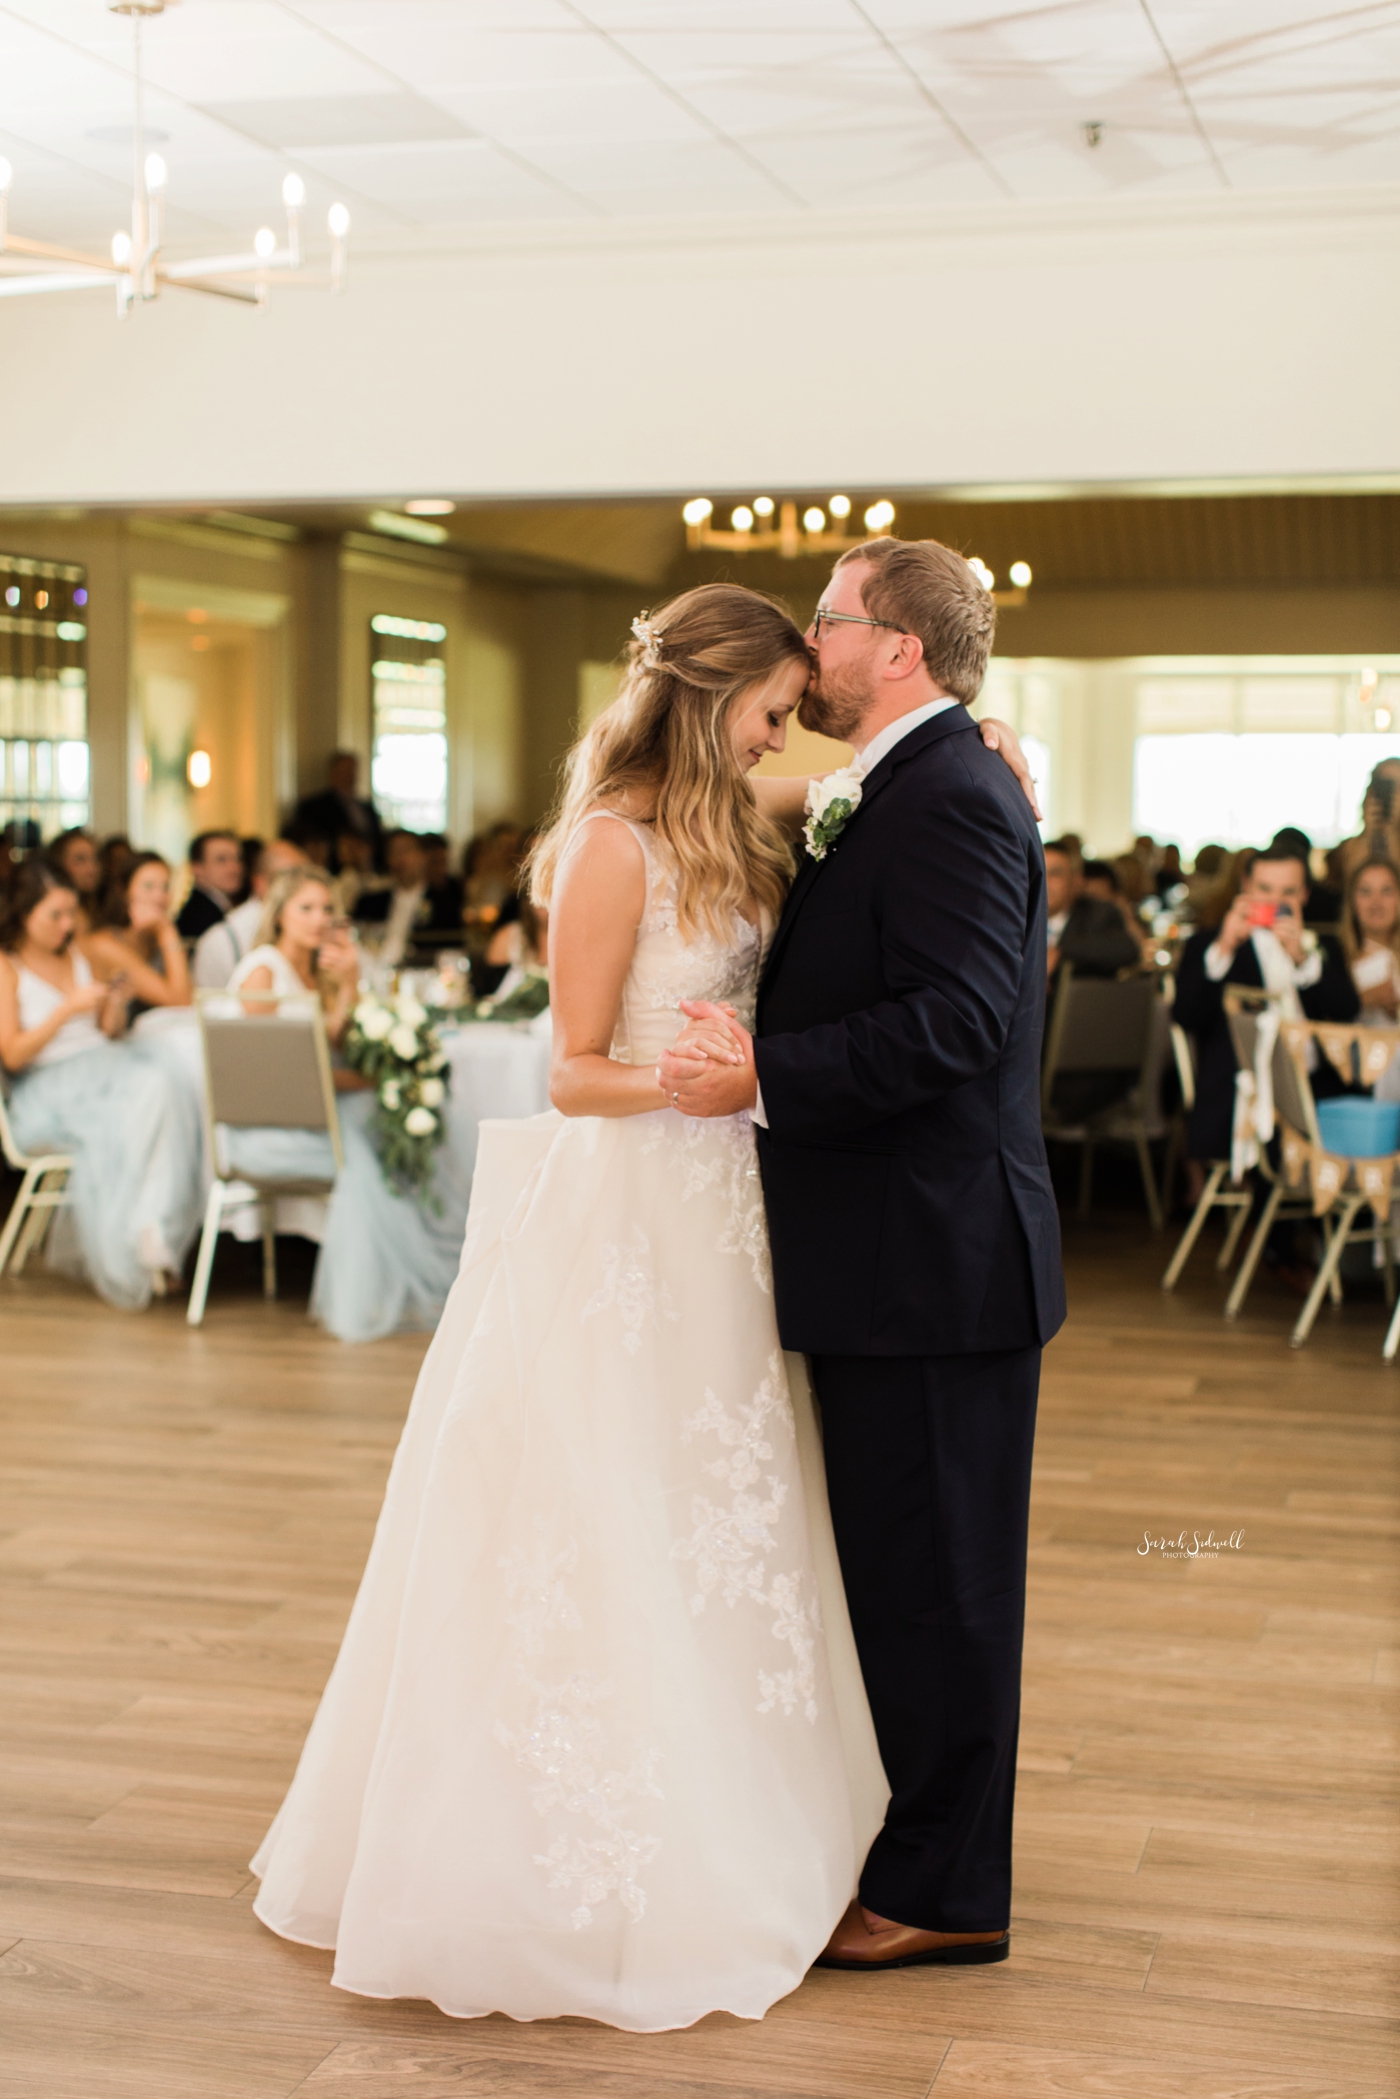 A bride shares a first dance with her groom. 